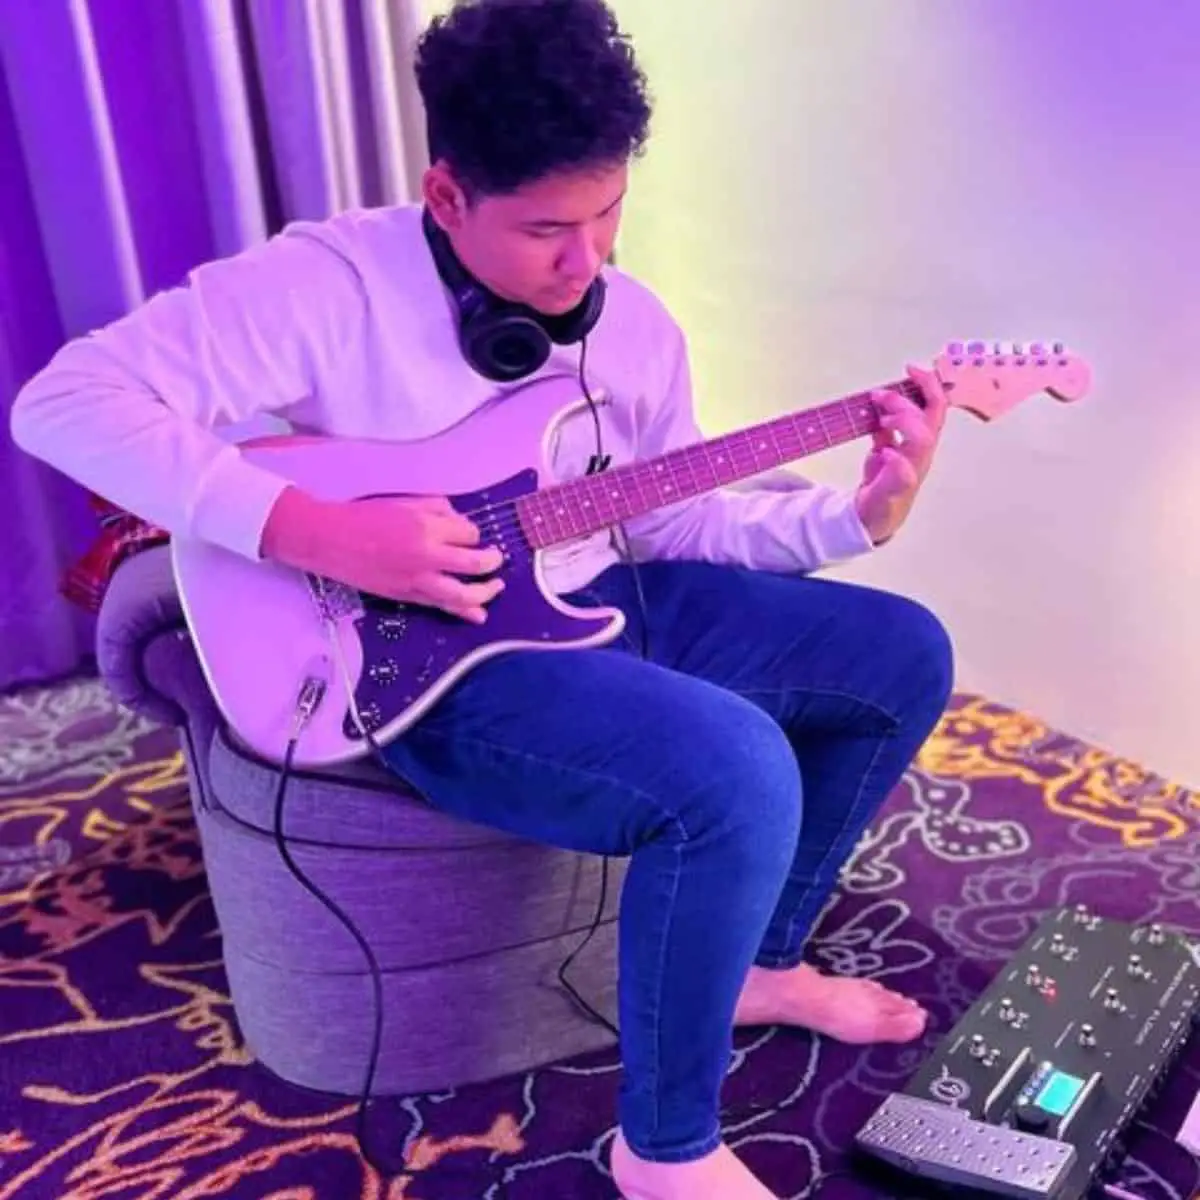 Playing guitar in Hard Rock Hotel room